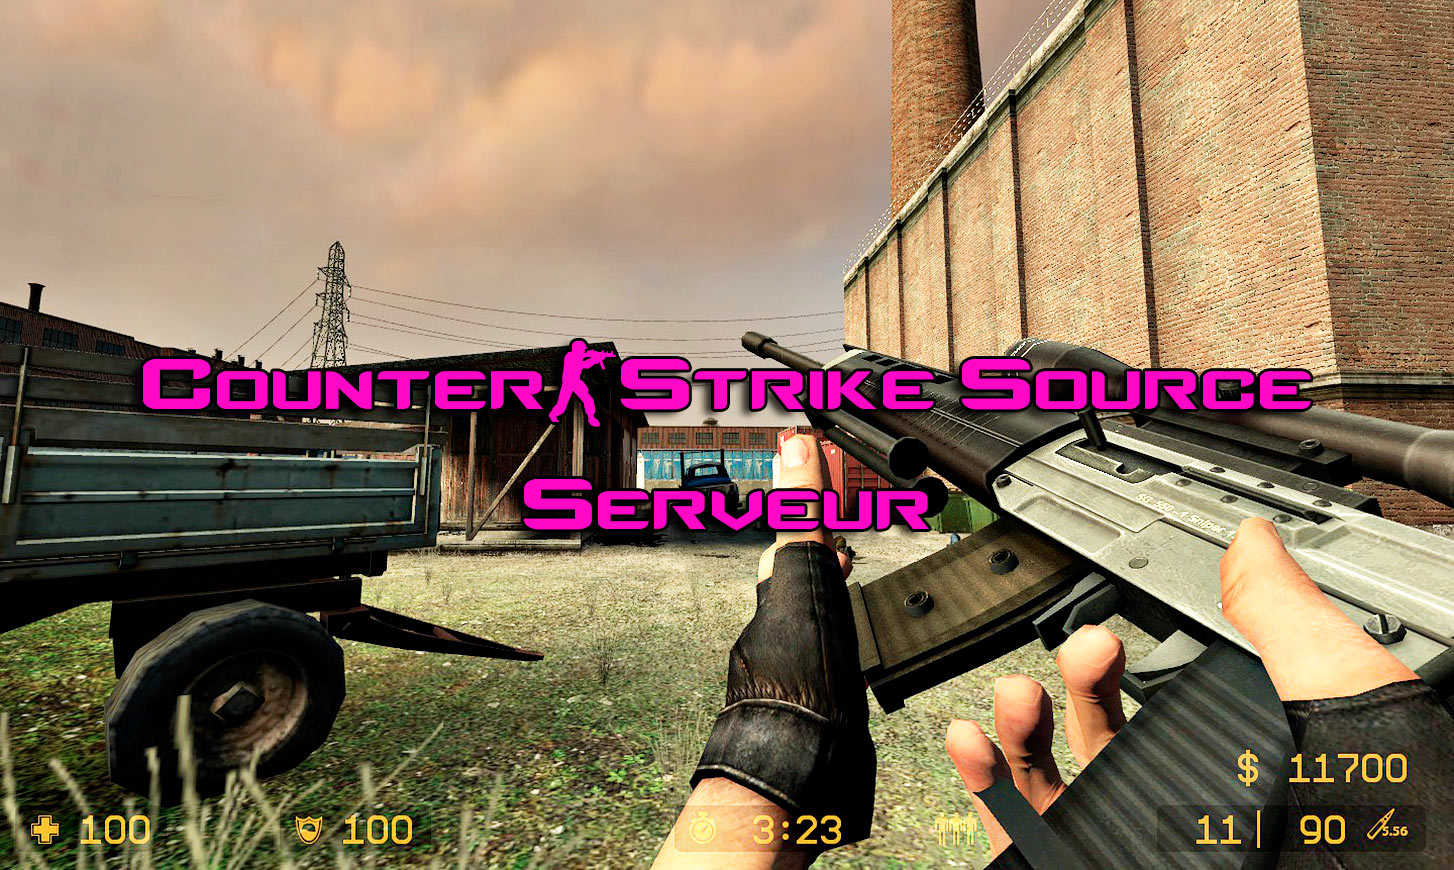 You are currently viewing Serveur Counter-Strike: Source